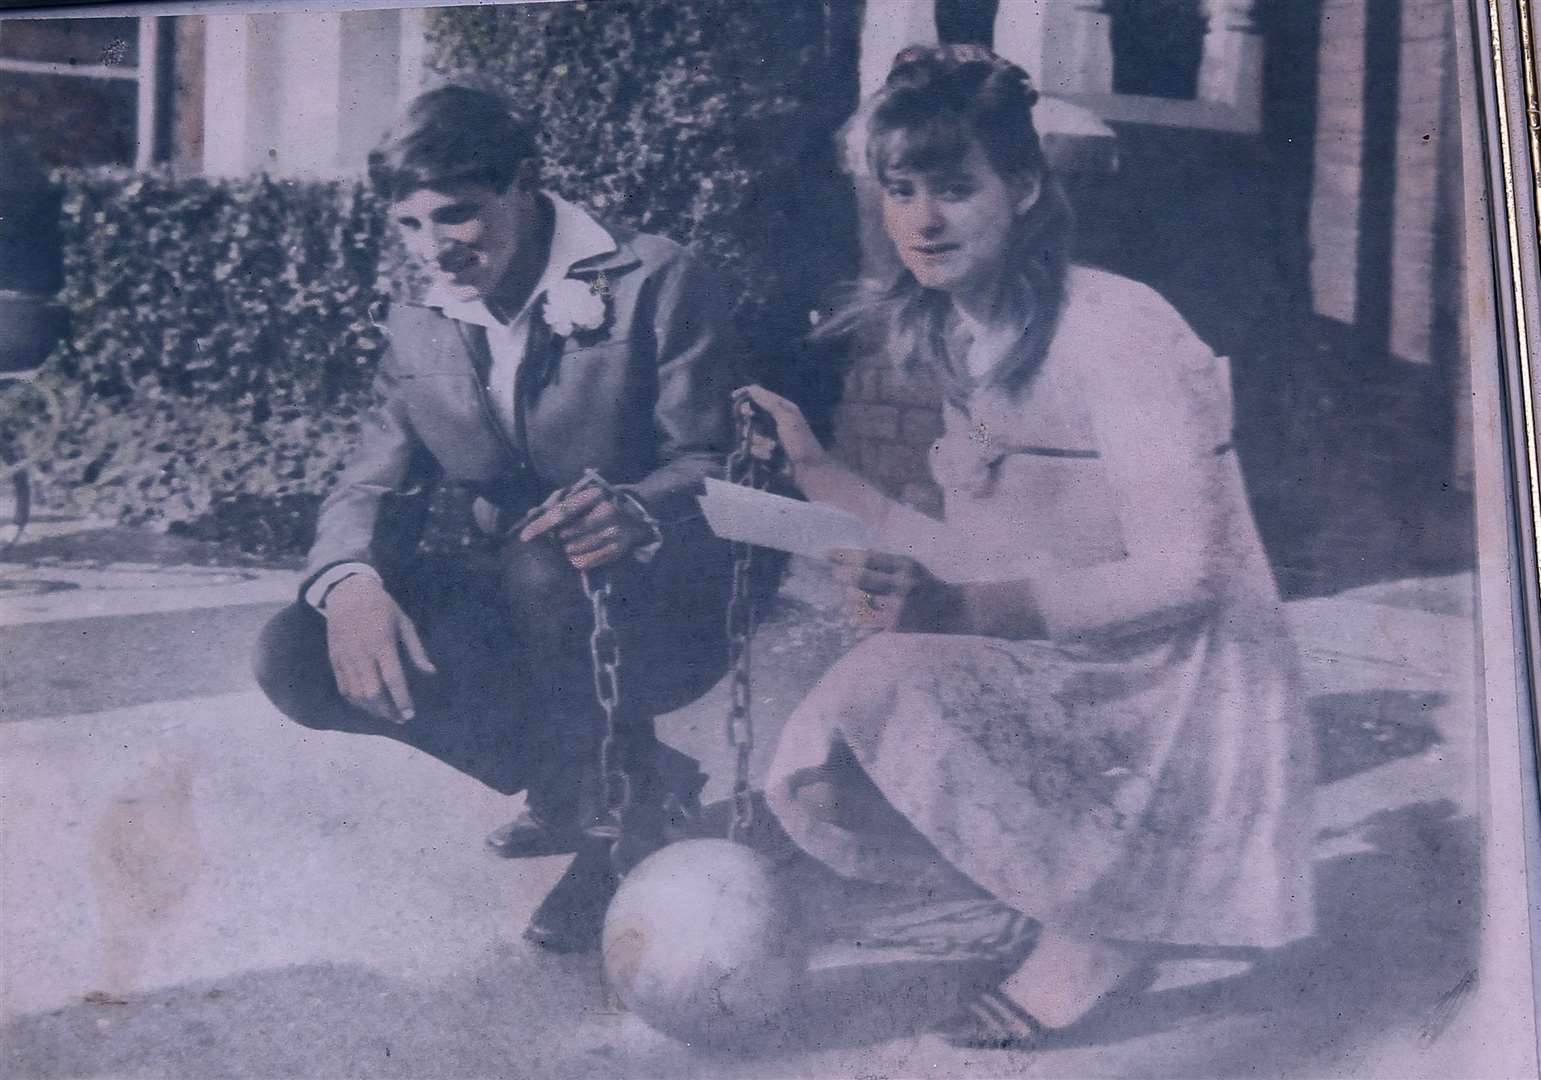 A wedding day picture shows Mr and Mrs Apps holding a ball and chain.